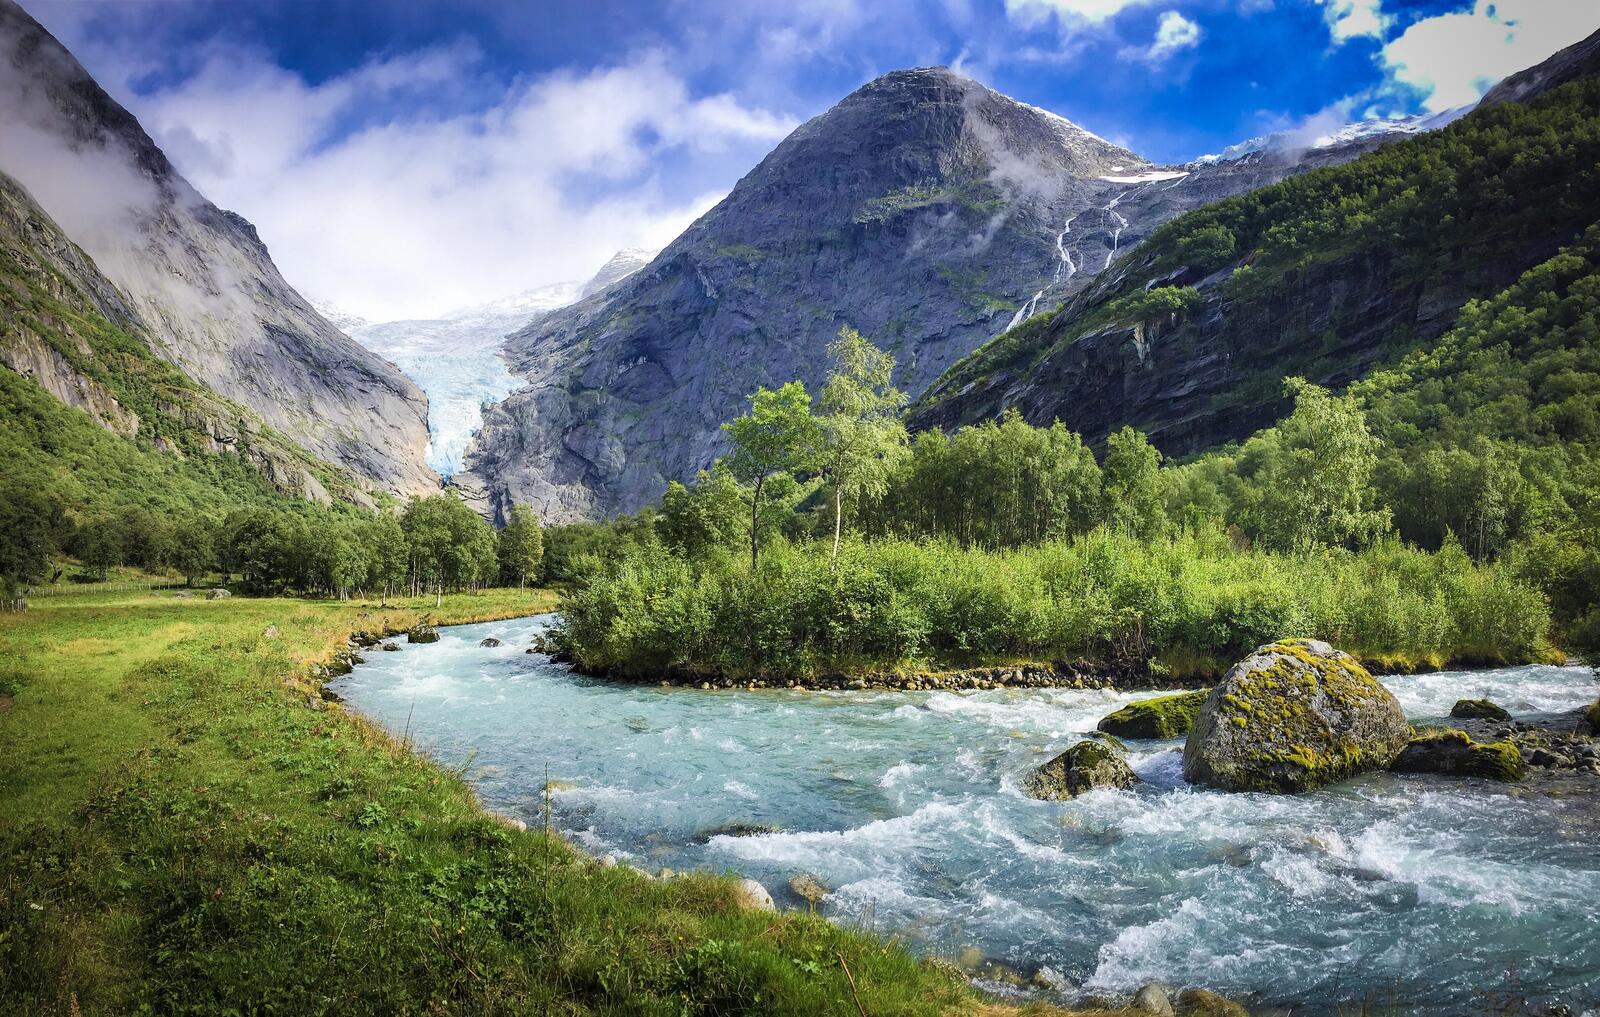 Wallpapers One of the beautiful glaciers of Norway the national Park Briksdalbreen Norway on the desktop